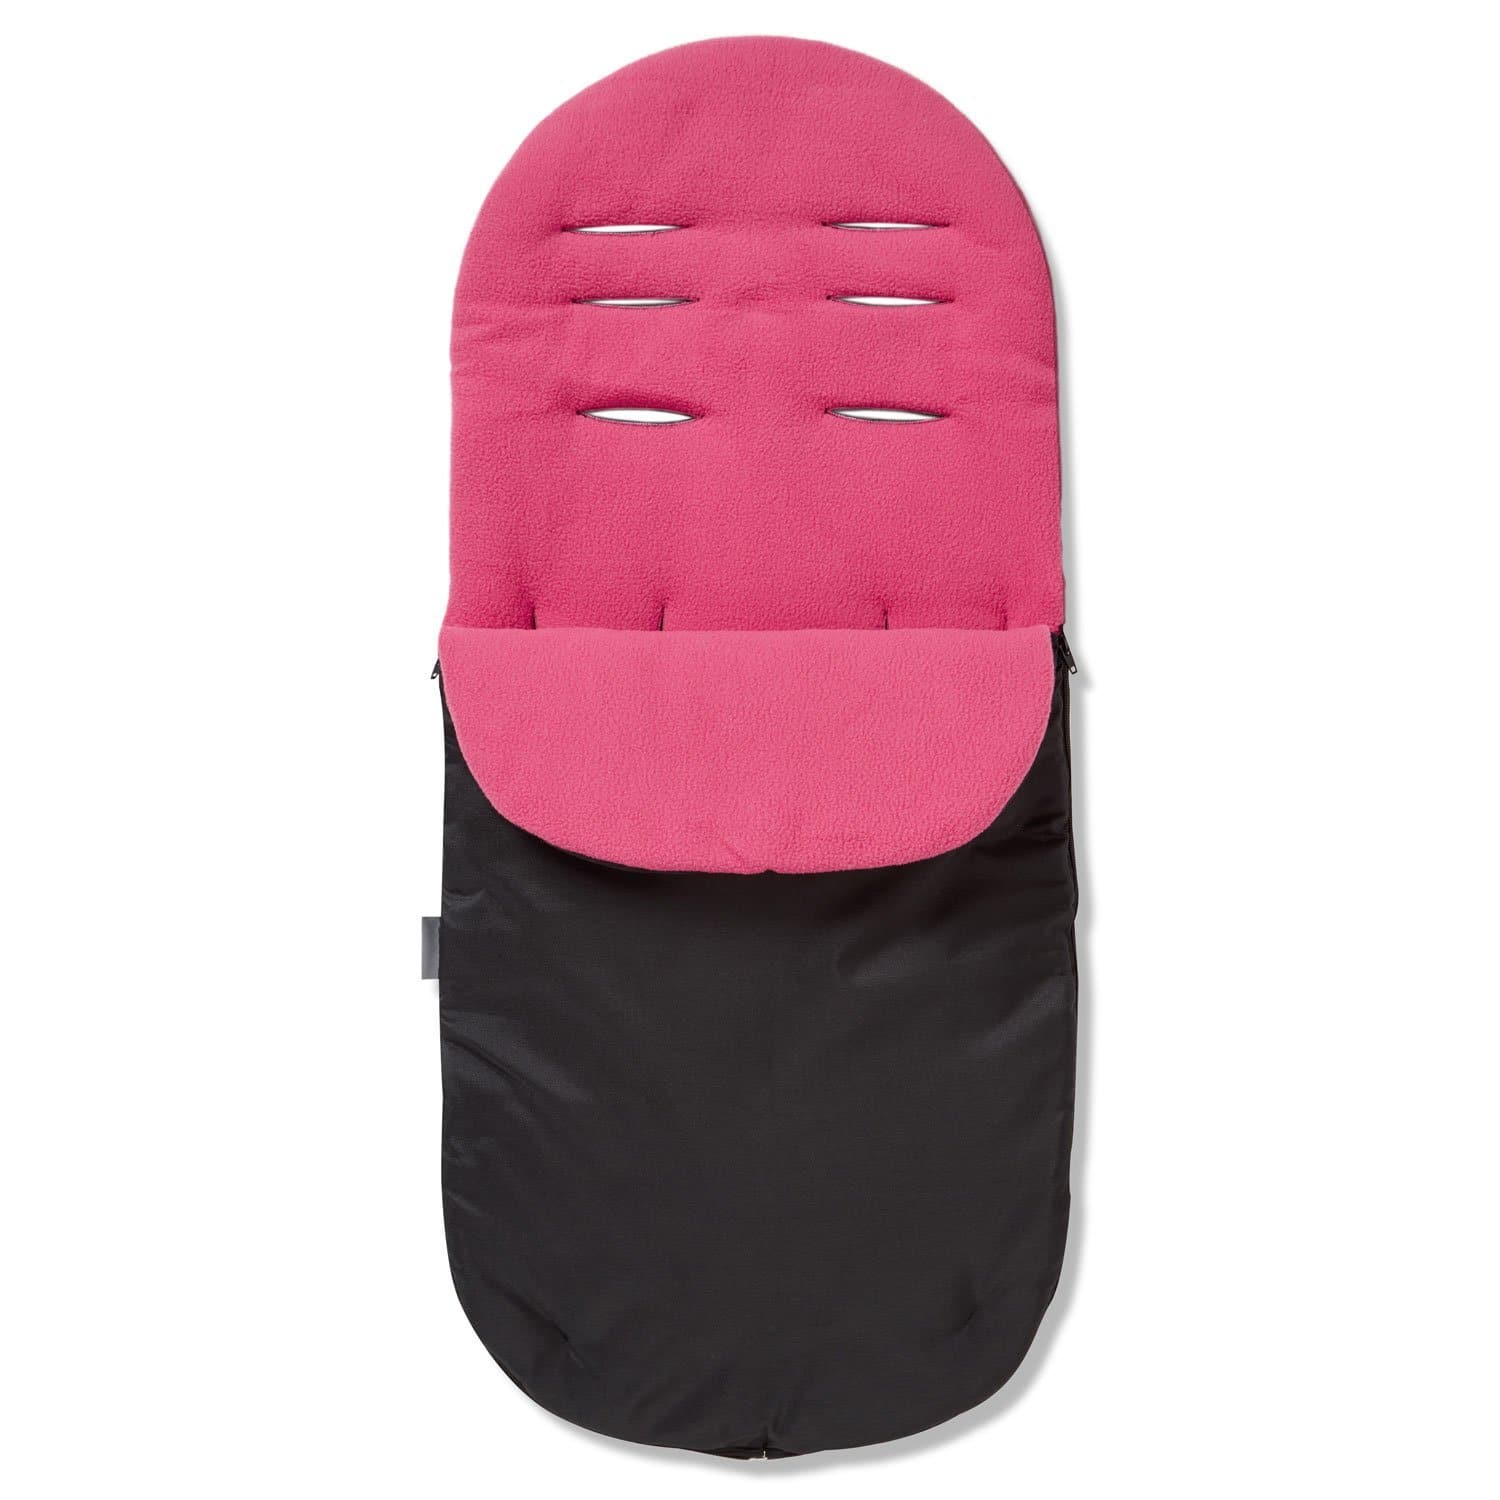 Footmuff / Cosy Toes Compatible with Britax - Dark Pink / Fits All Models | For Your Little One